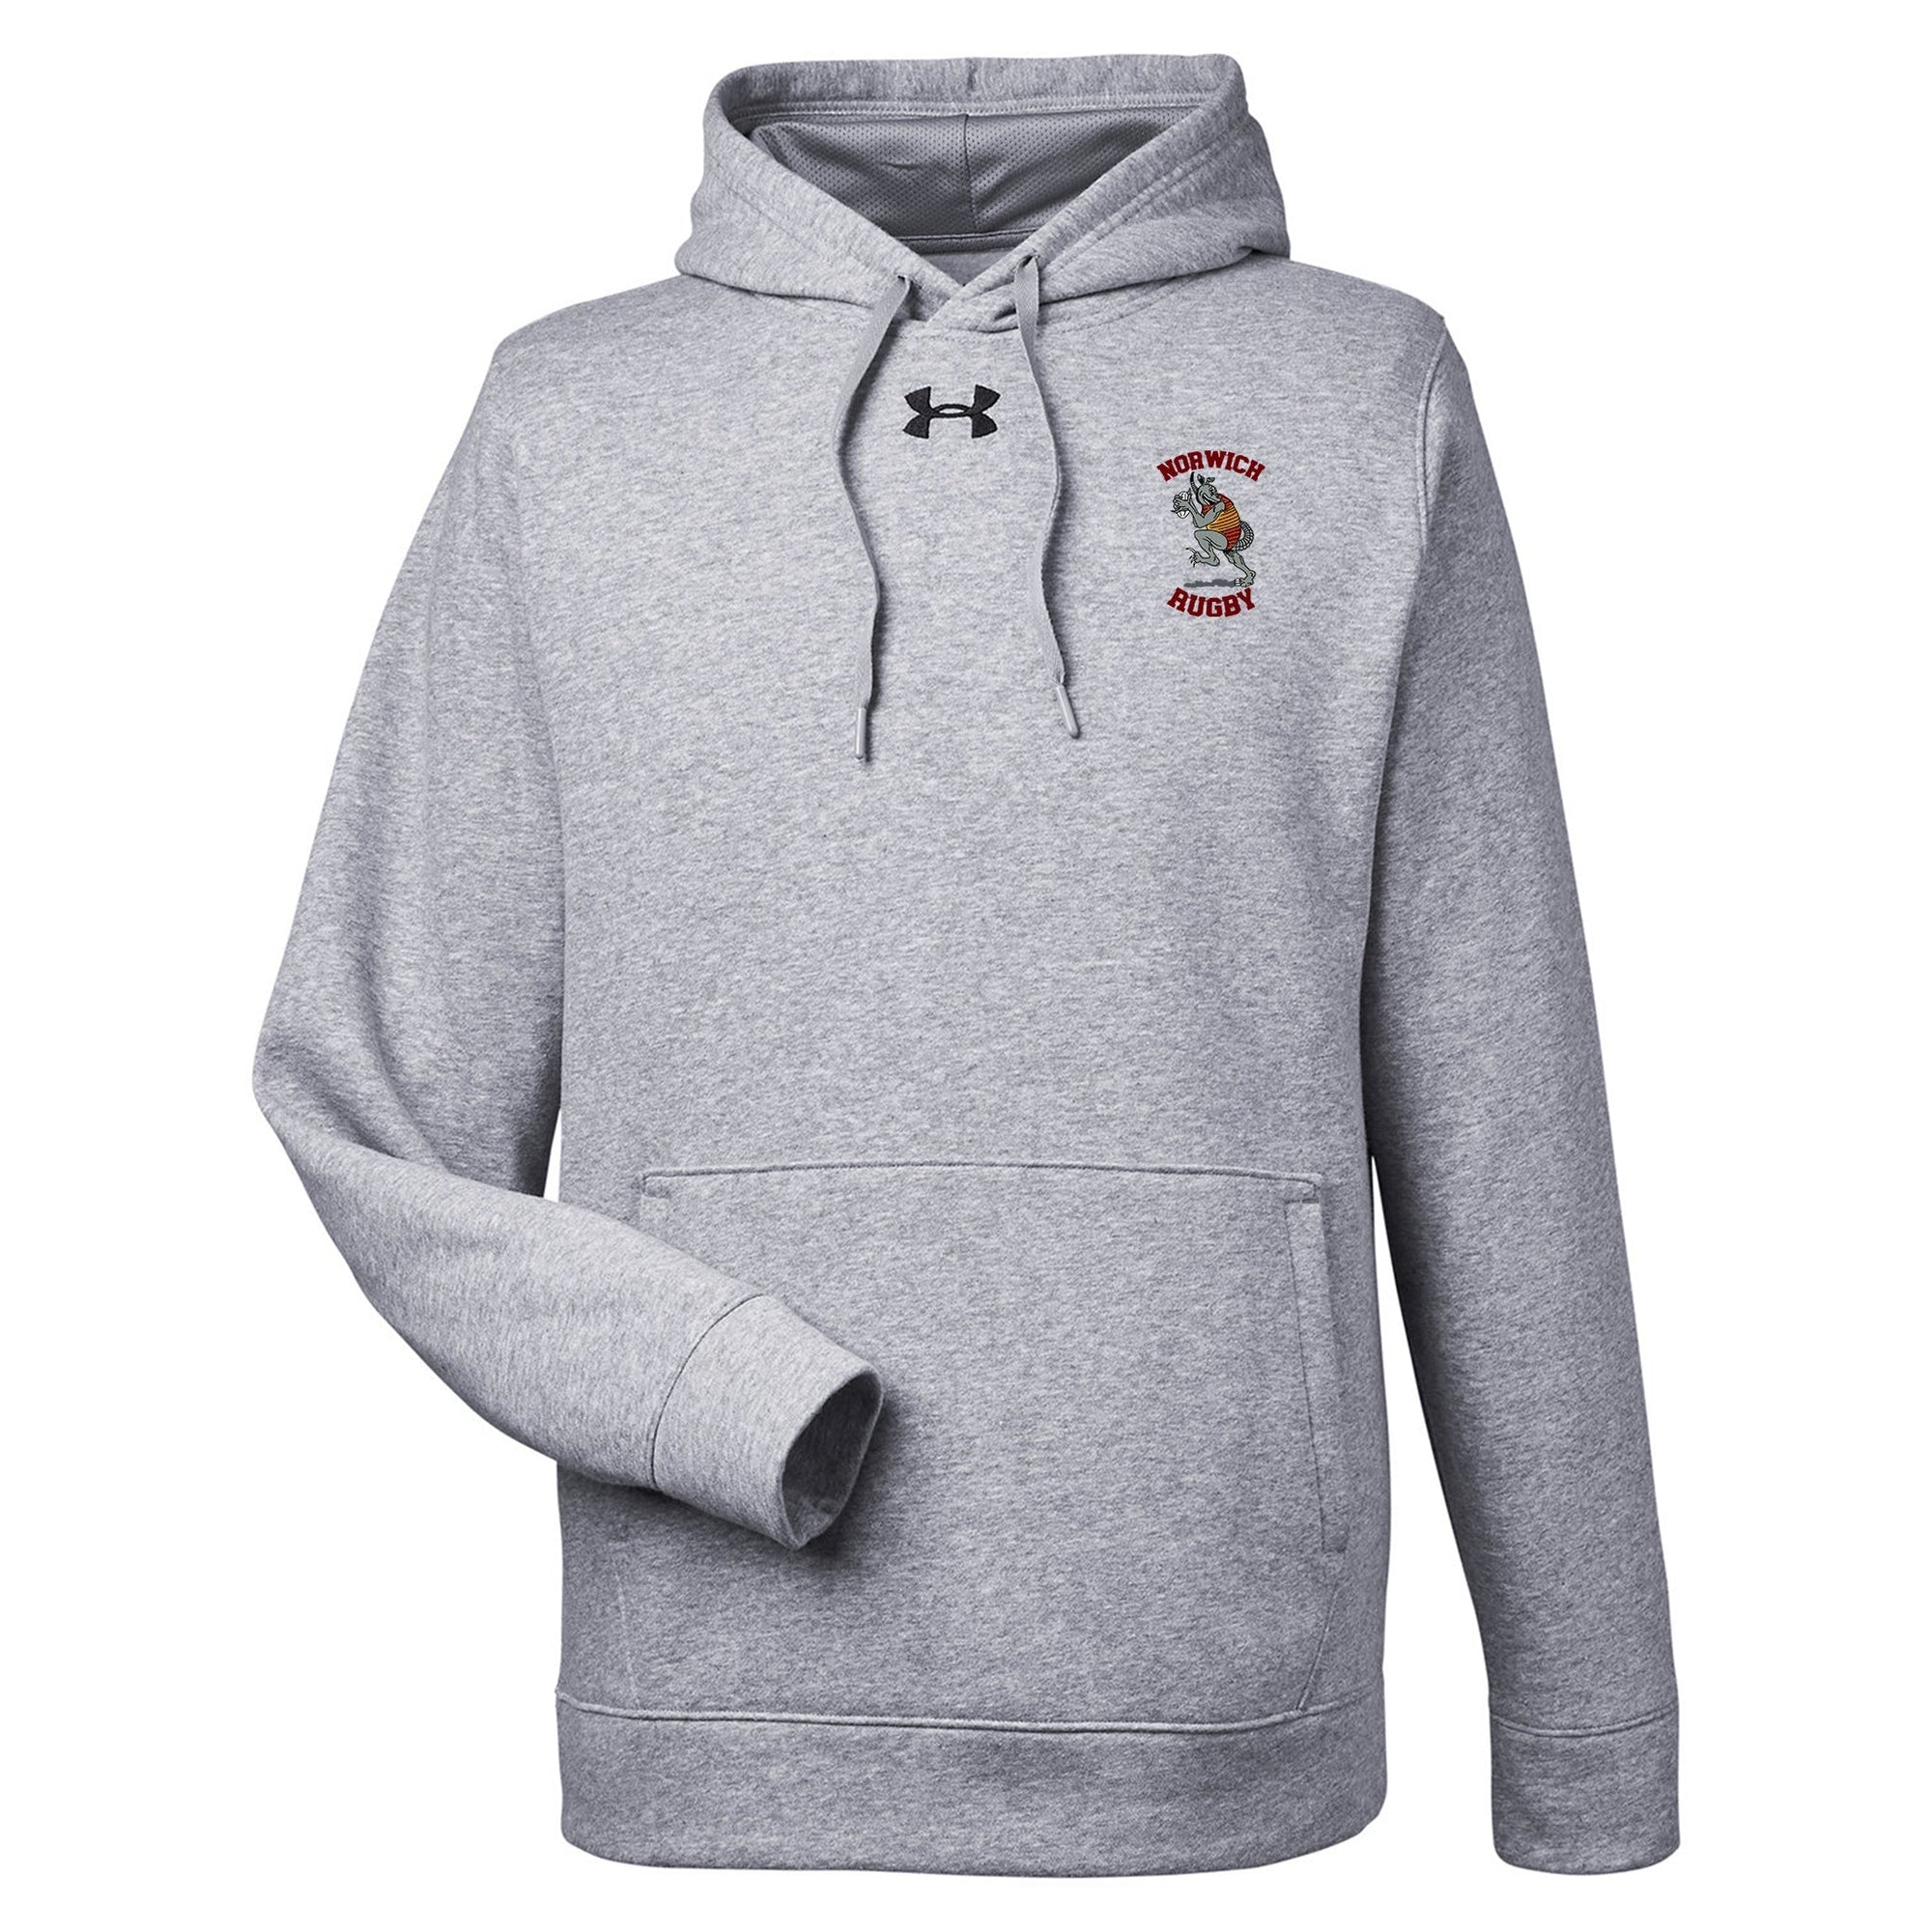 Rugby Imports Norwich Rugby Hustle Hoodie